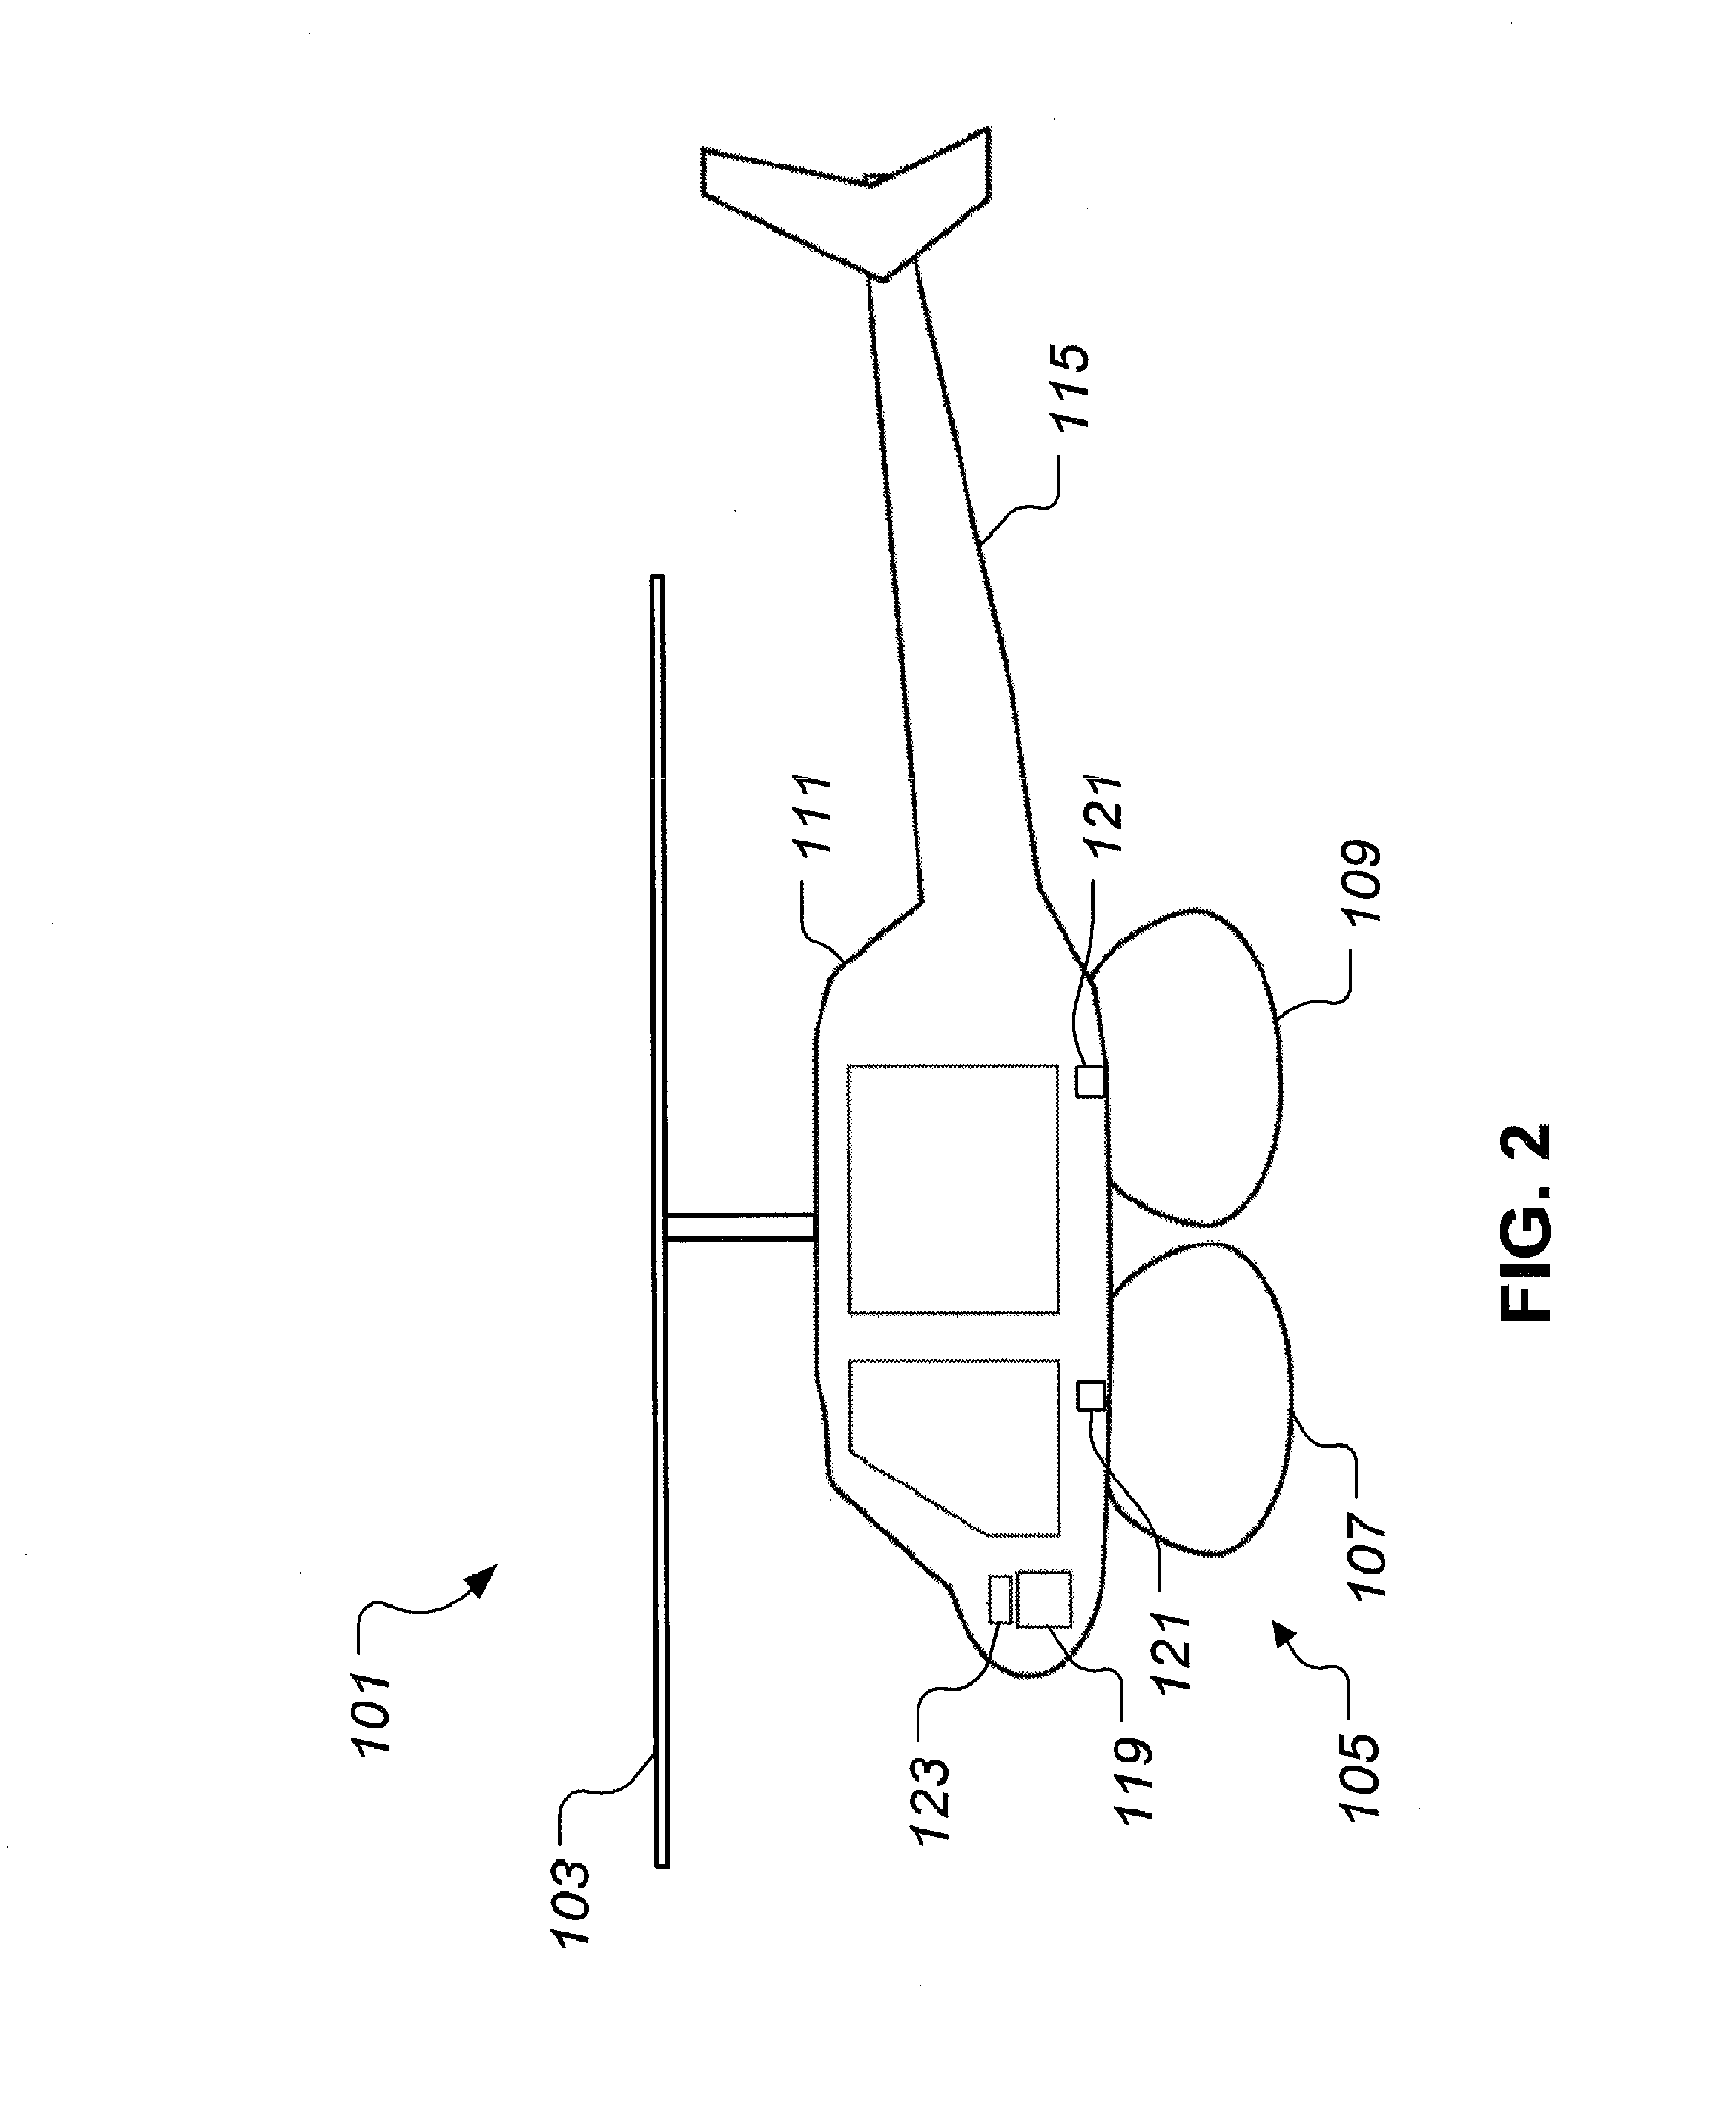 Active Vent and Re-Inflation System for a Crash Attenuation Airbag